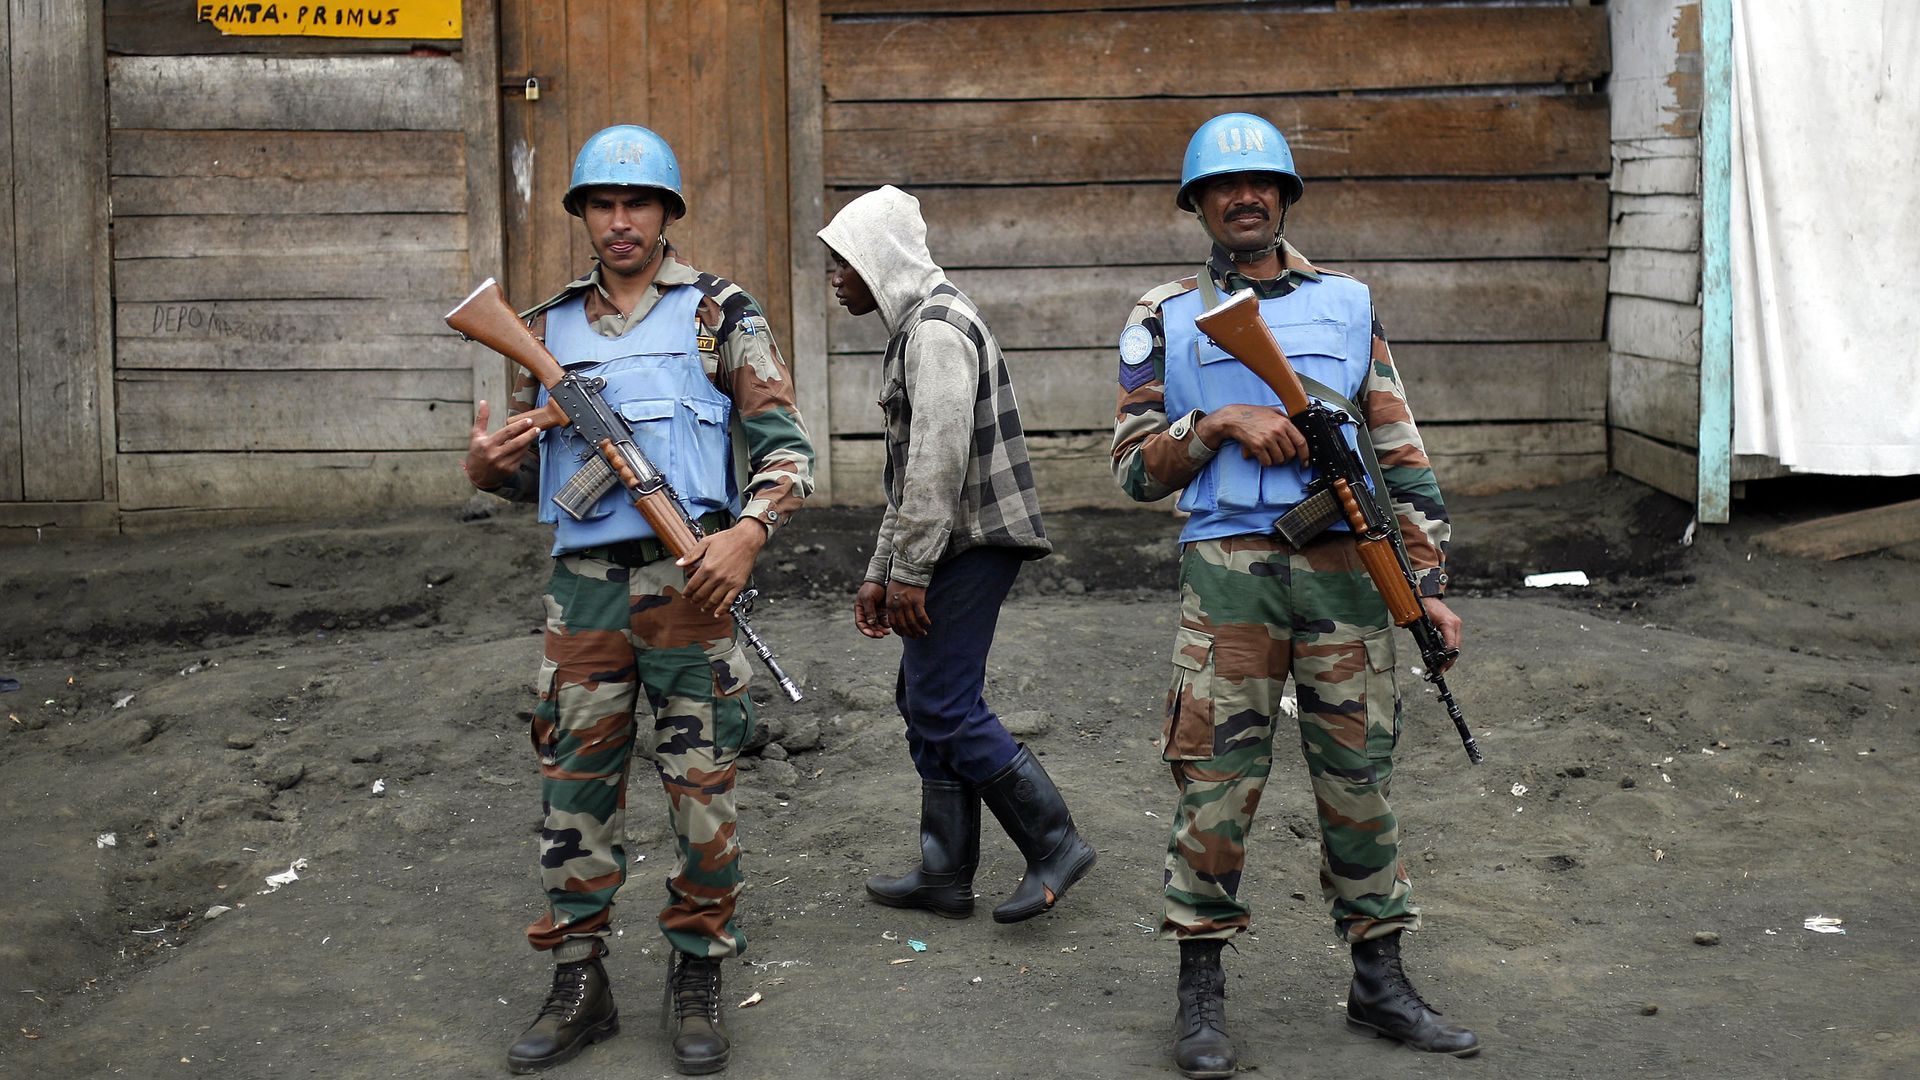 Two UN soldiers wearing blue helmets and vests stand guard in Congo while another man walks behind them wearing a grey jacket with a hood. 